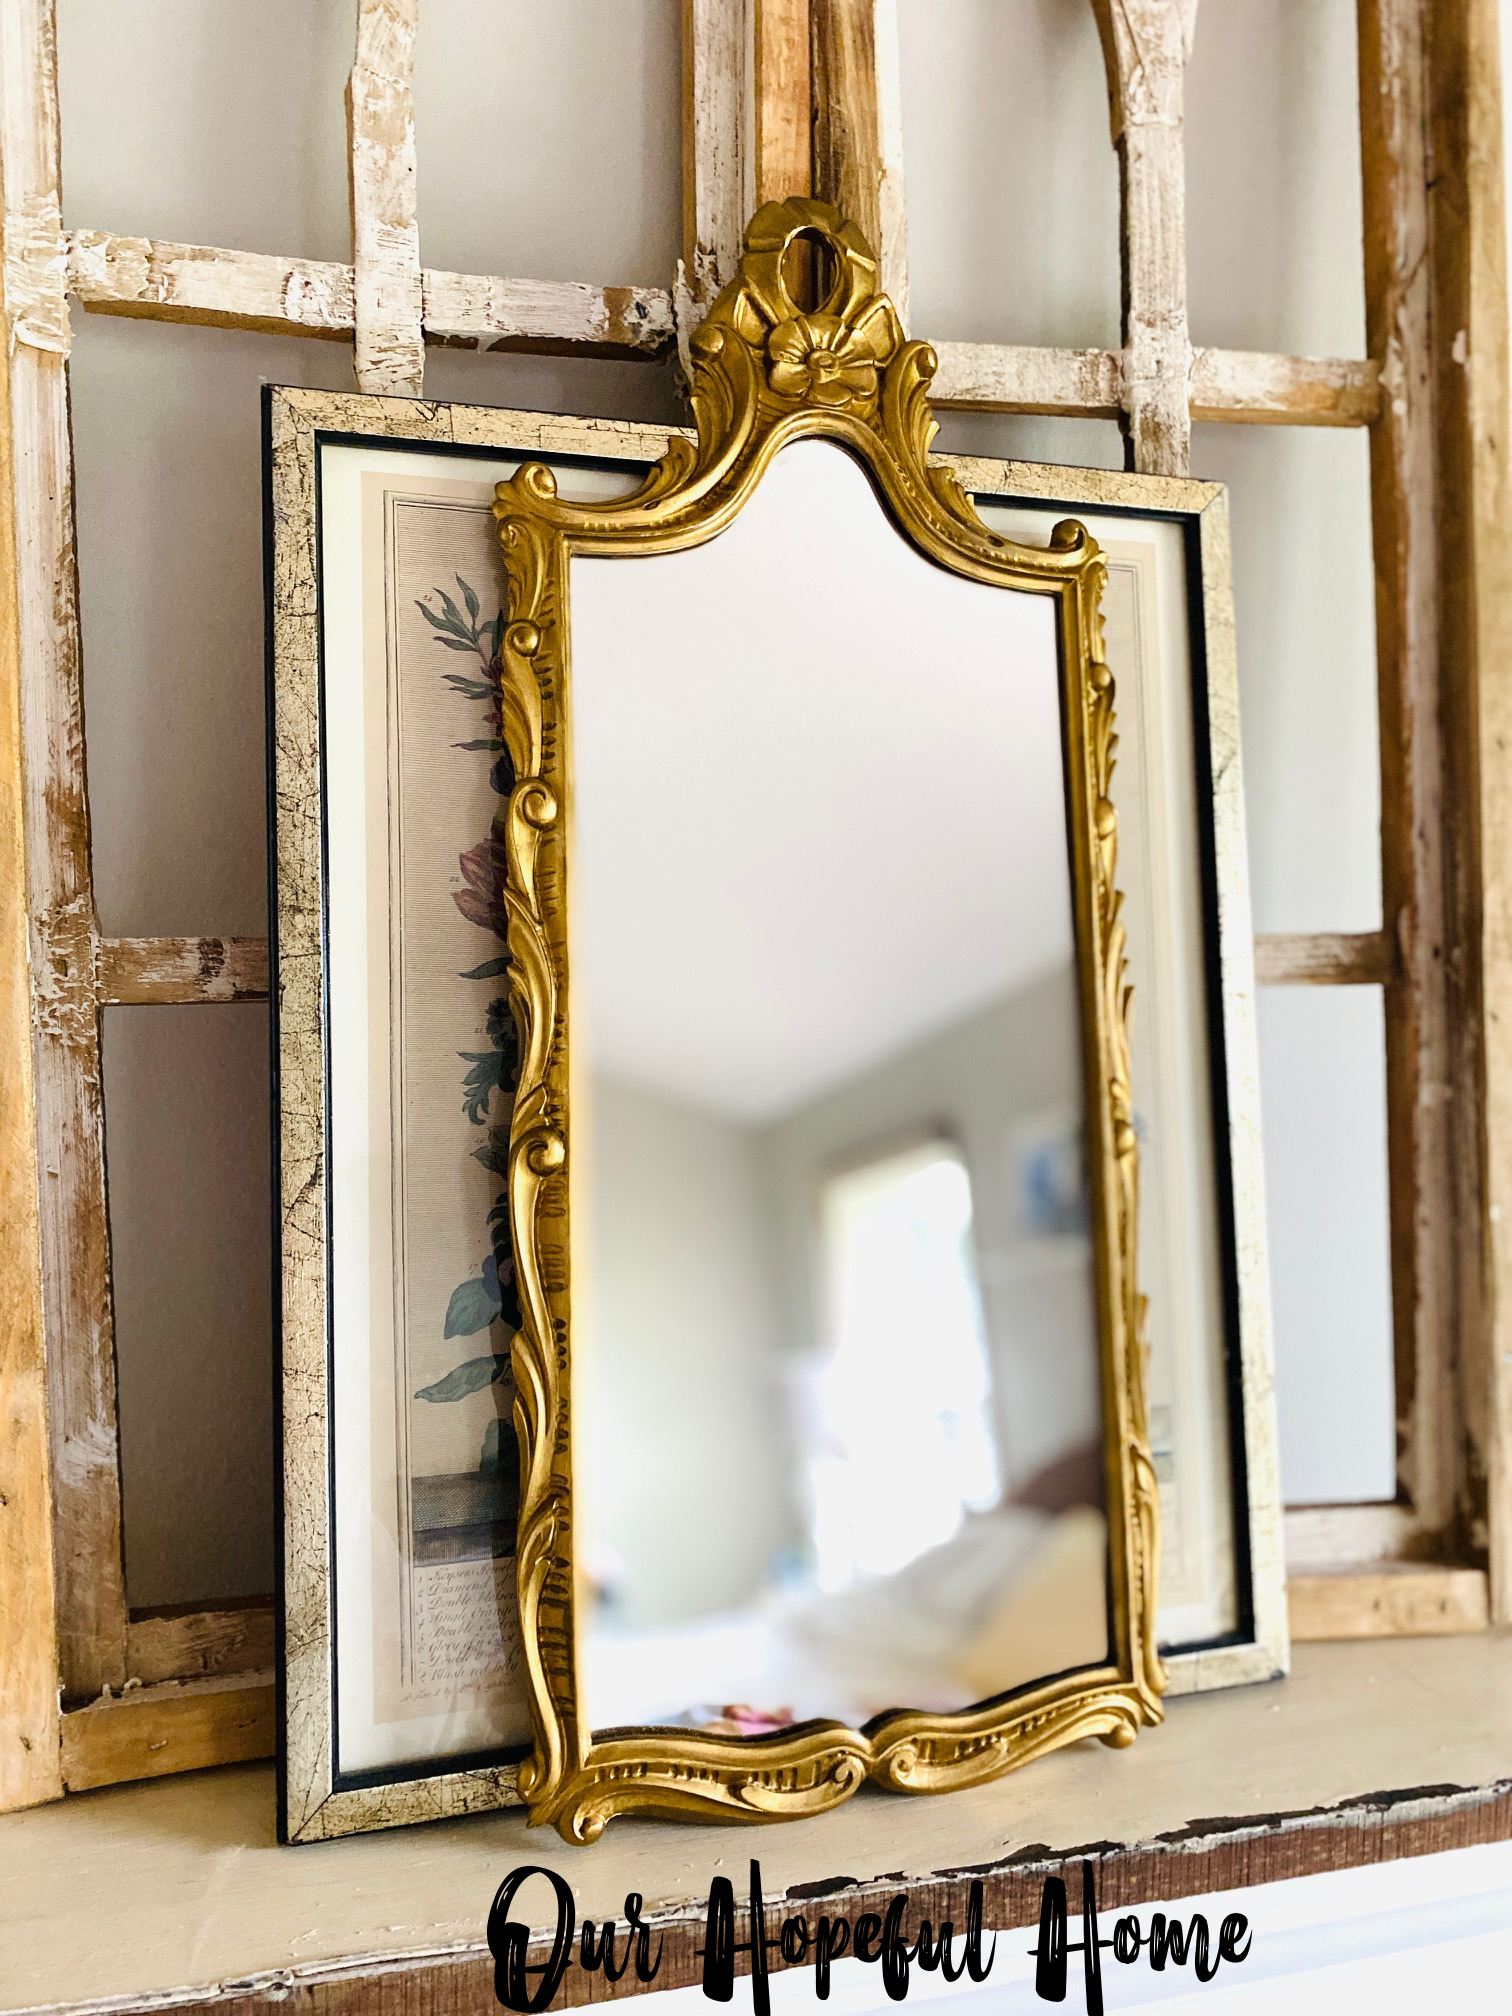 DIY quick gold leaf mirror upgrade - The Homesteady